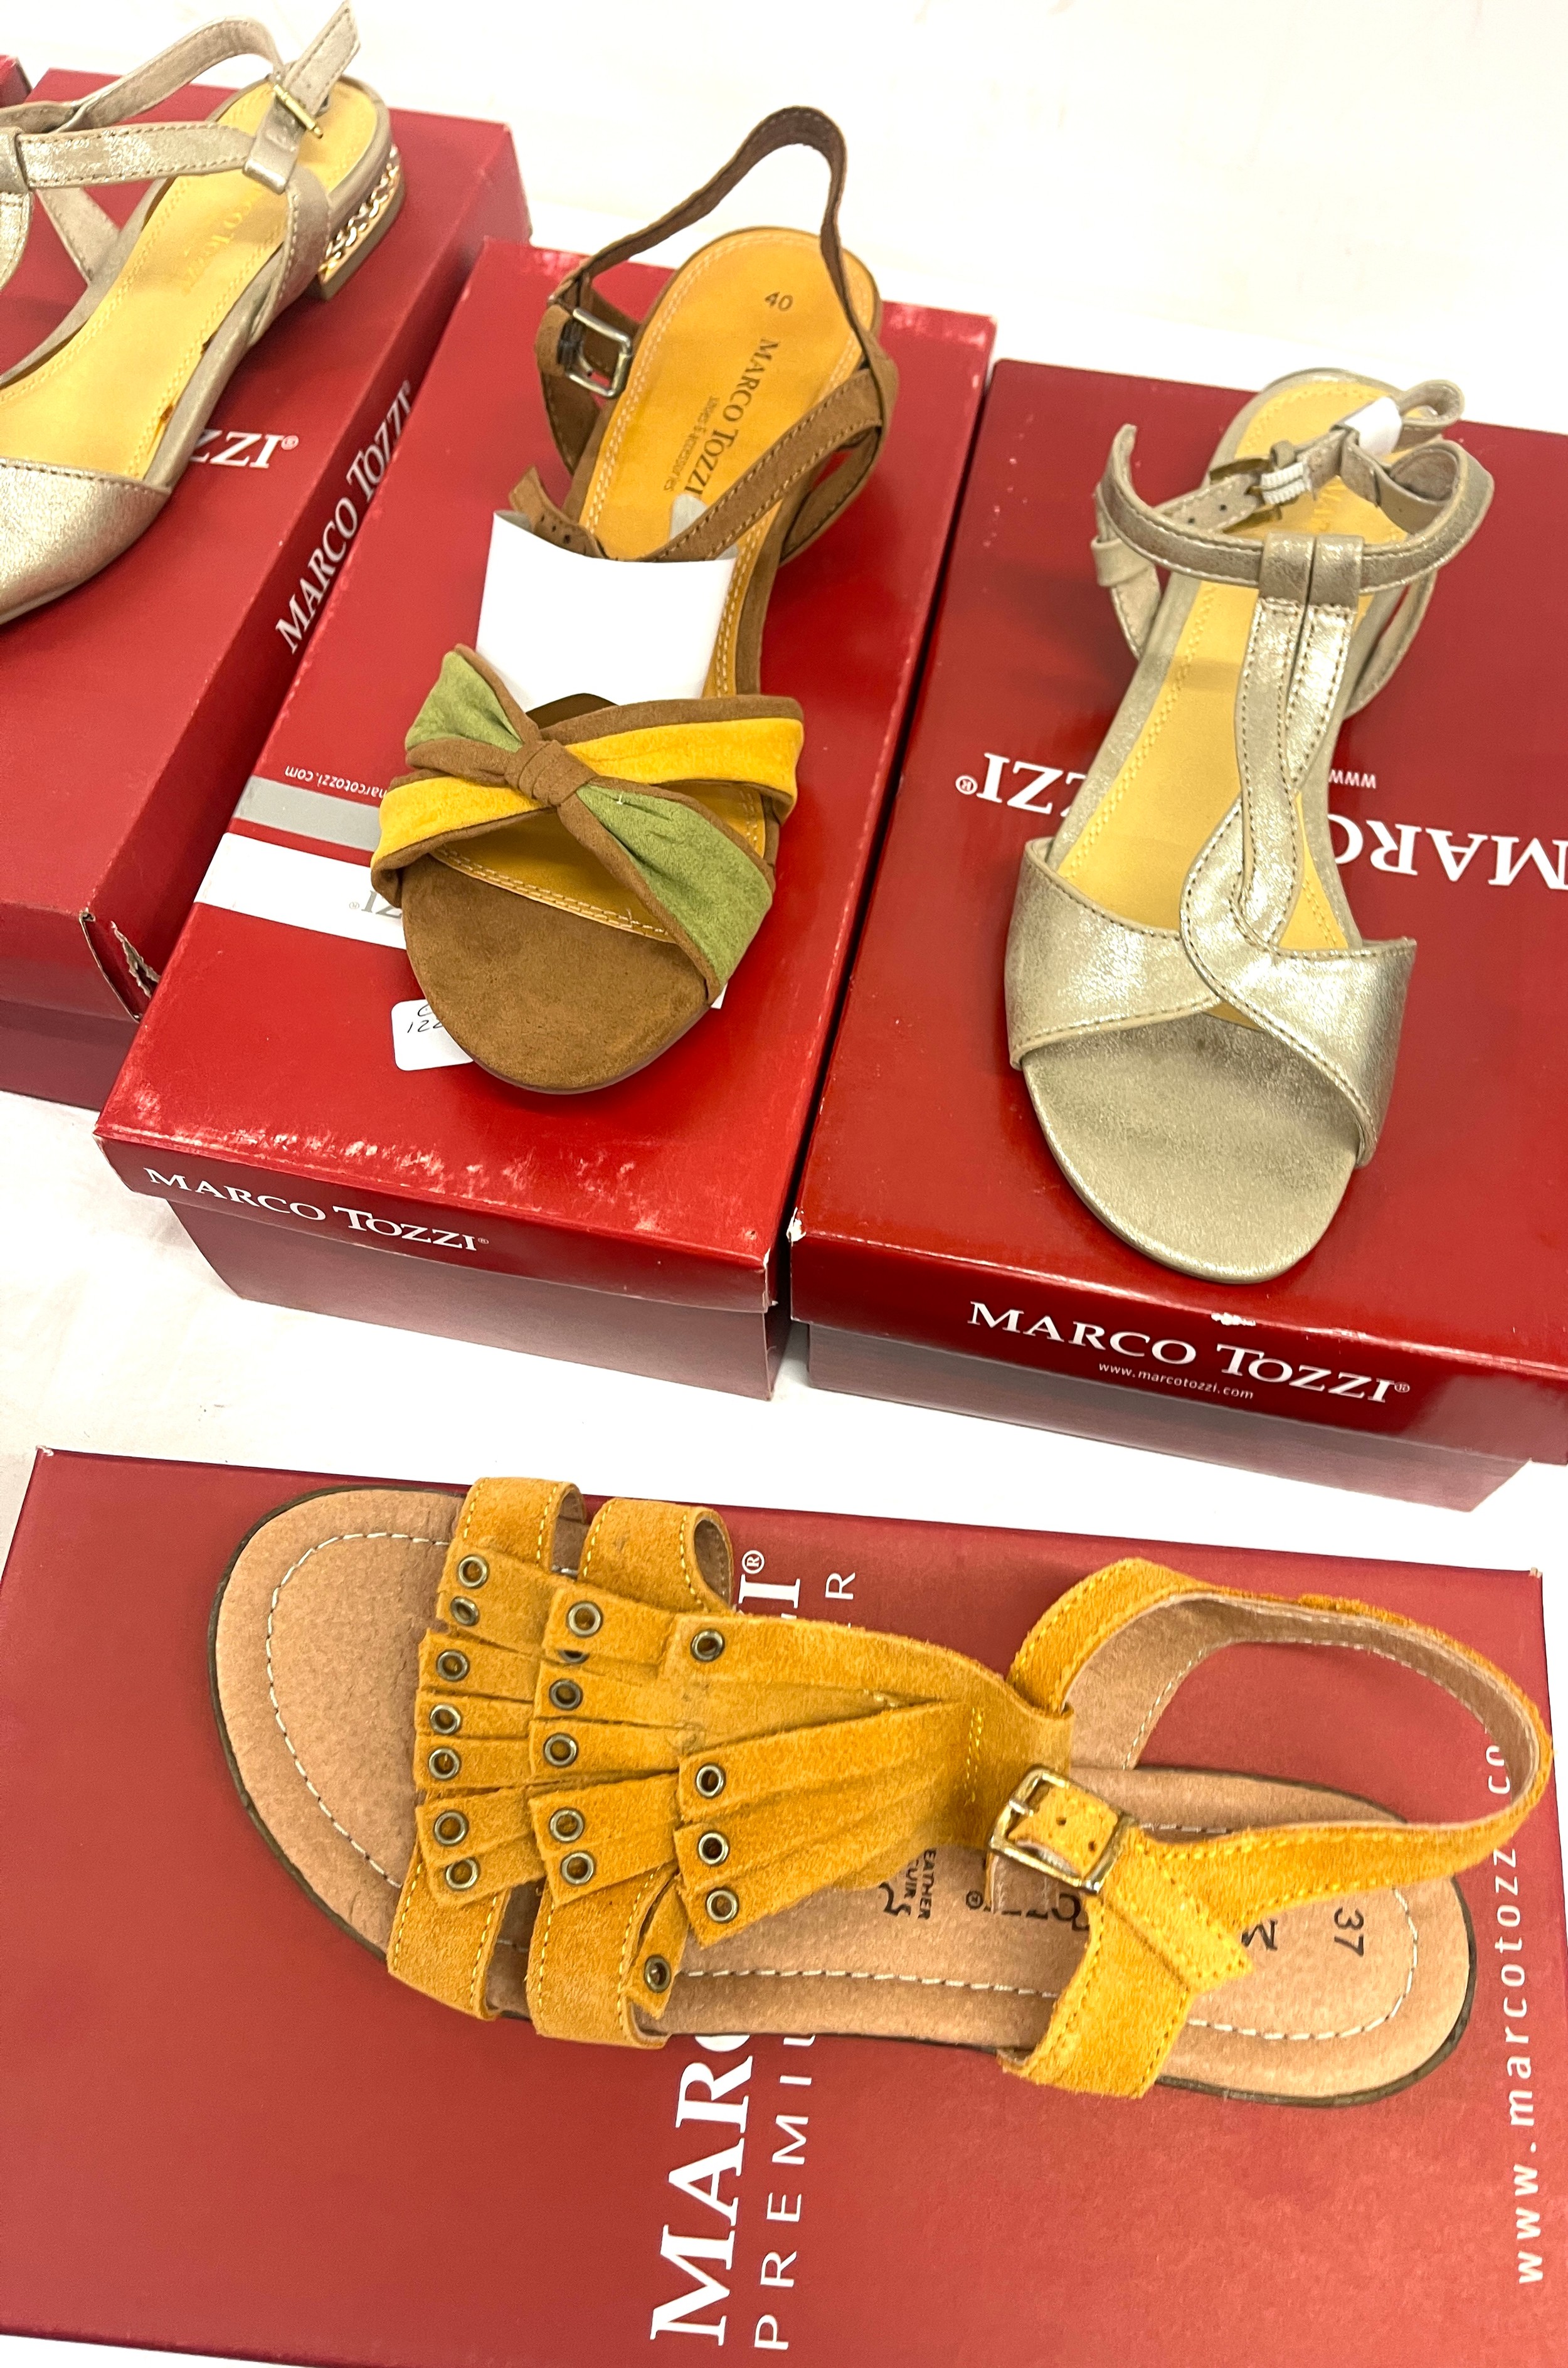 6 new and boxed Marco Tozzi ladies shoes, various sizes - Image 2 of 3